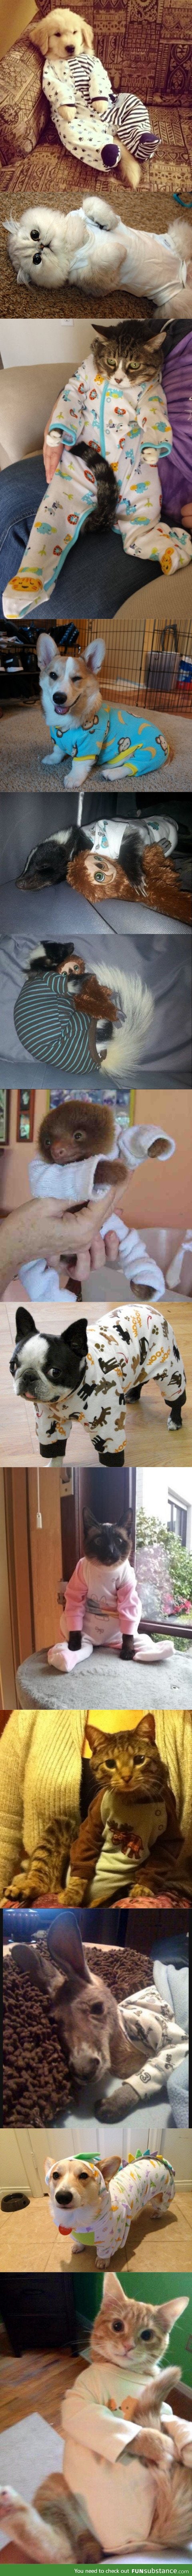 Who said Onesies were just for babies?